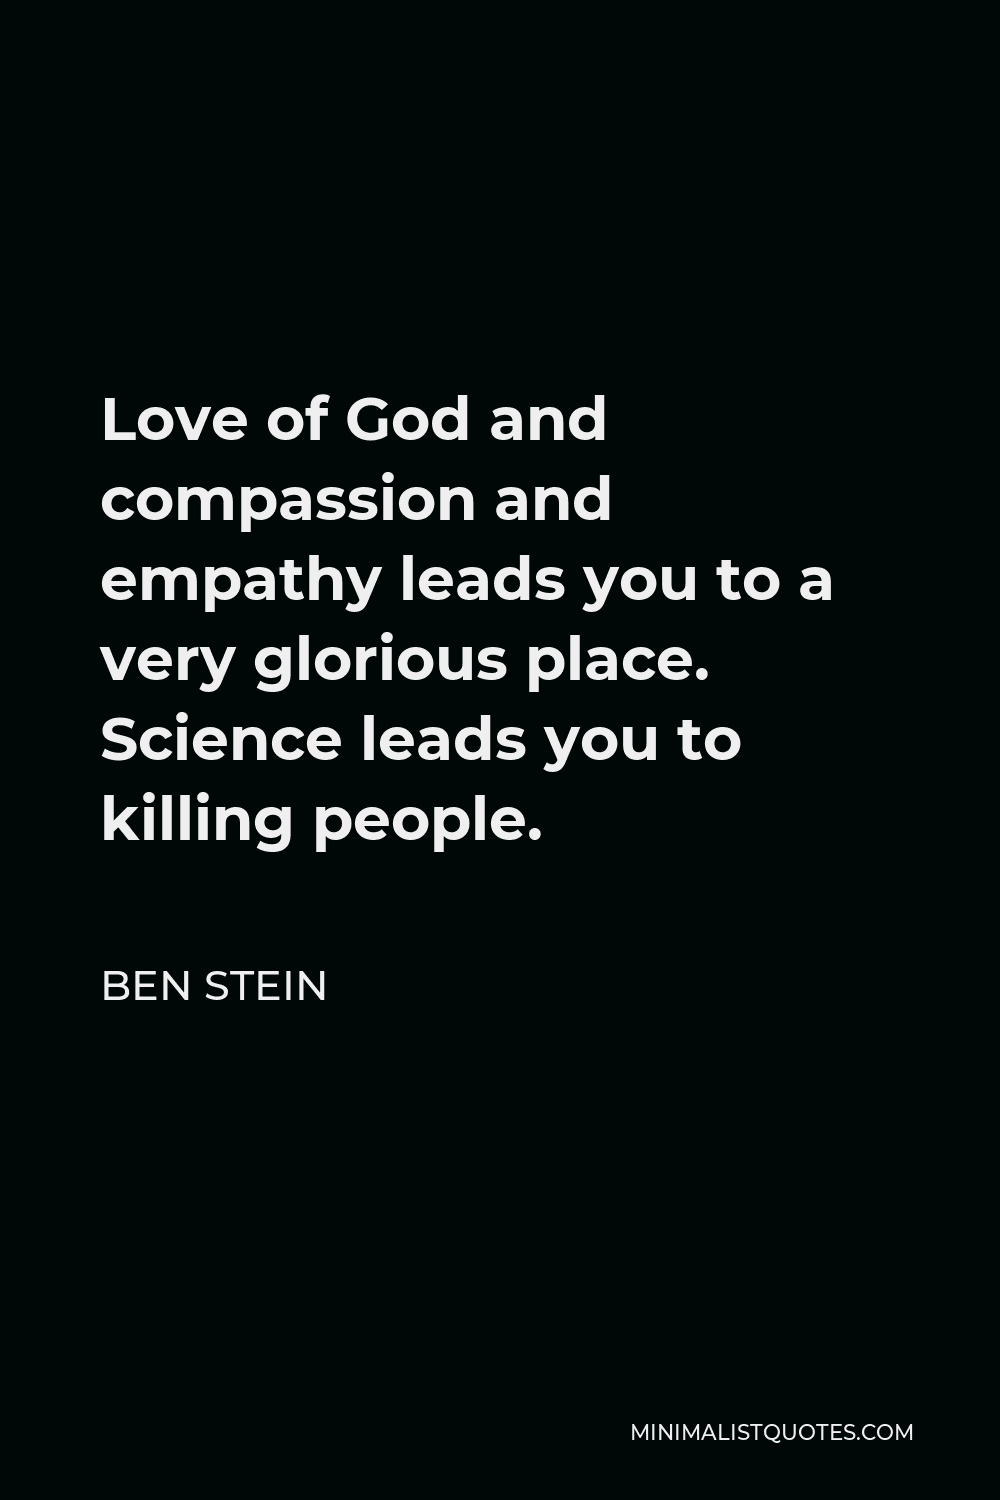 Ben Stein Quote - Love of God and compassion and empathy leads you to a very glorious place. Science leads you to killing people.